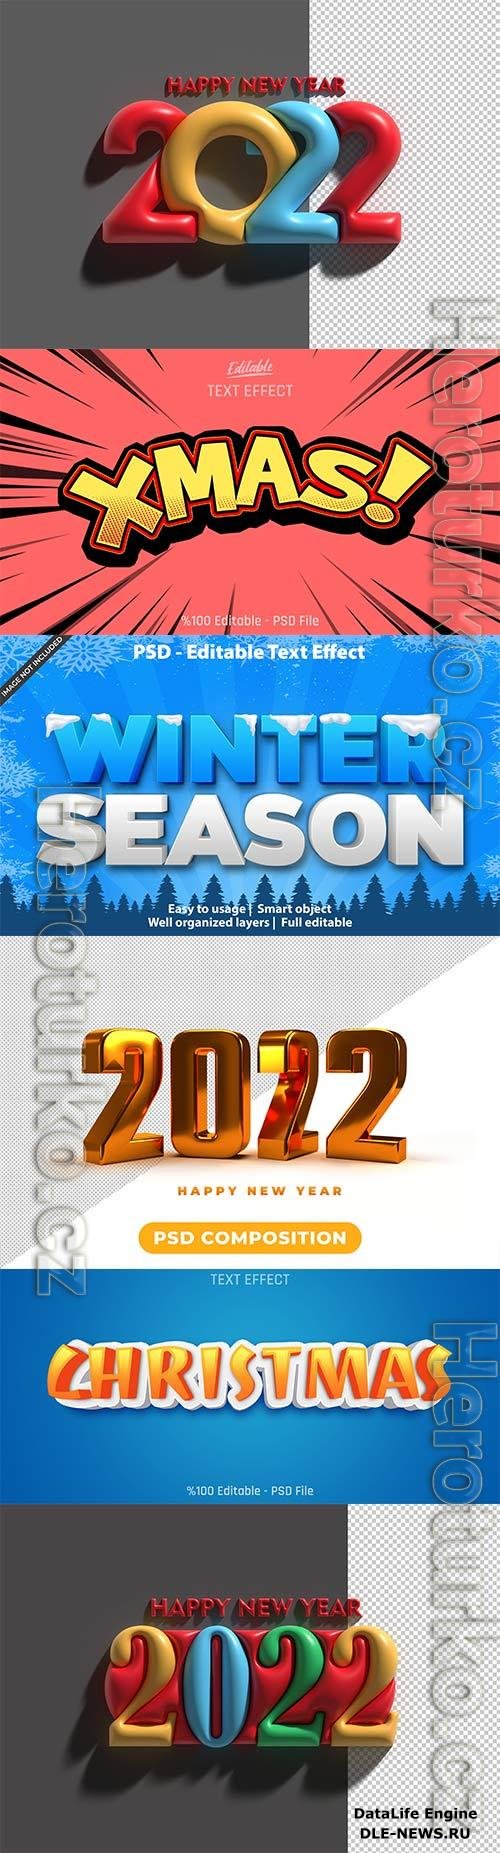 Christmas and new year 2022 psd text effect